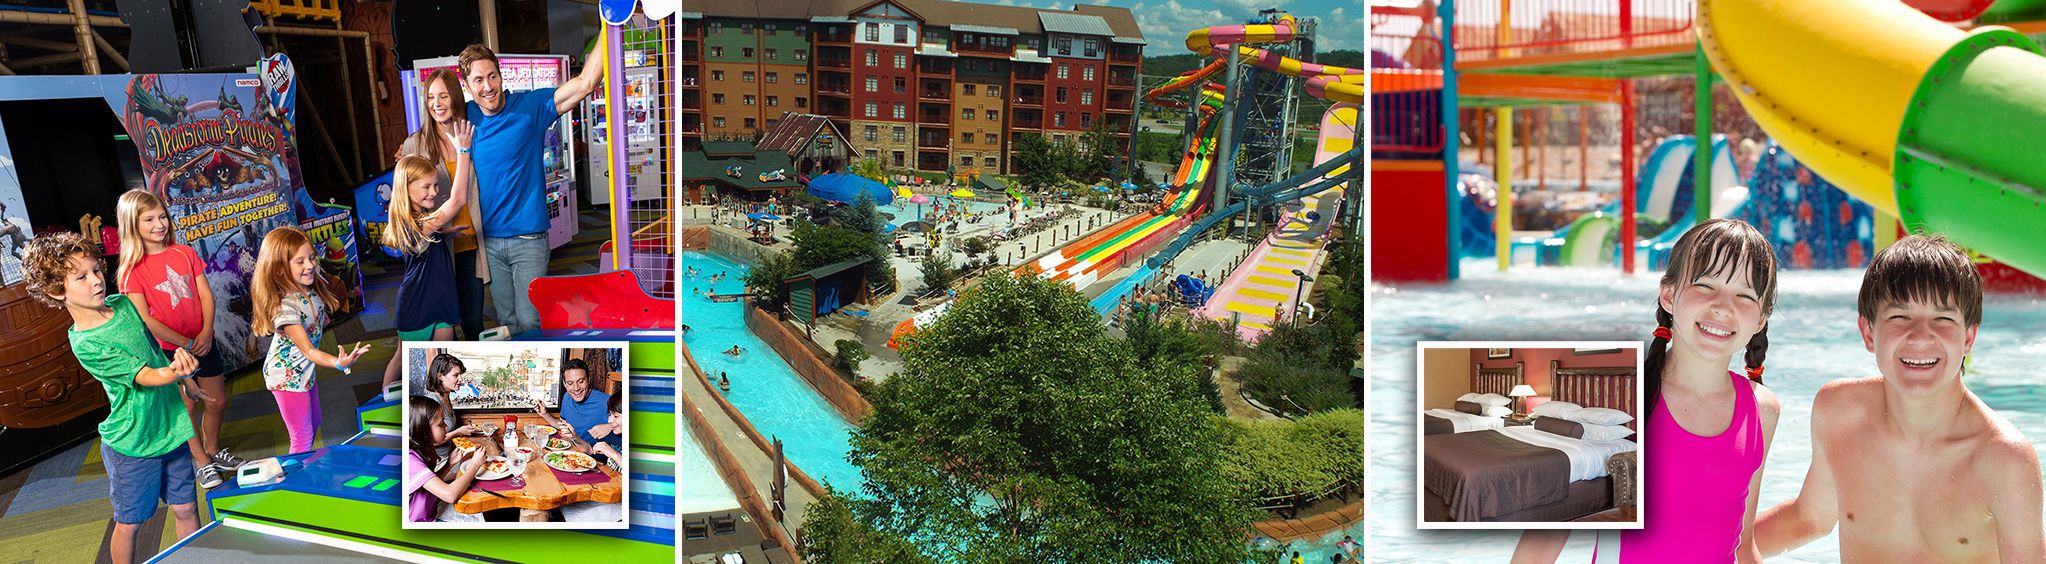 Wilderness at the Smokies Resort and Waterpark